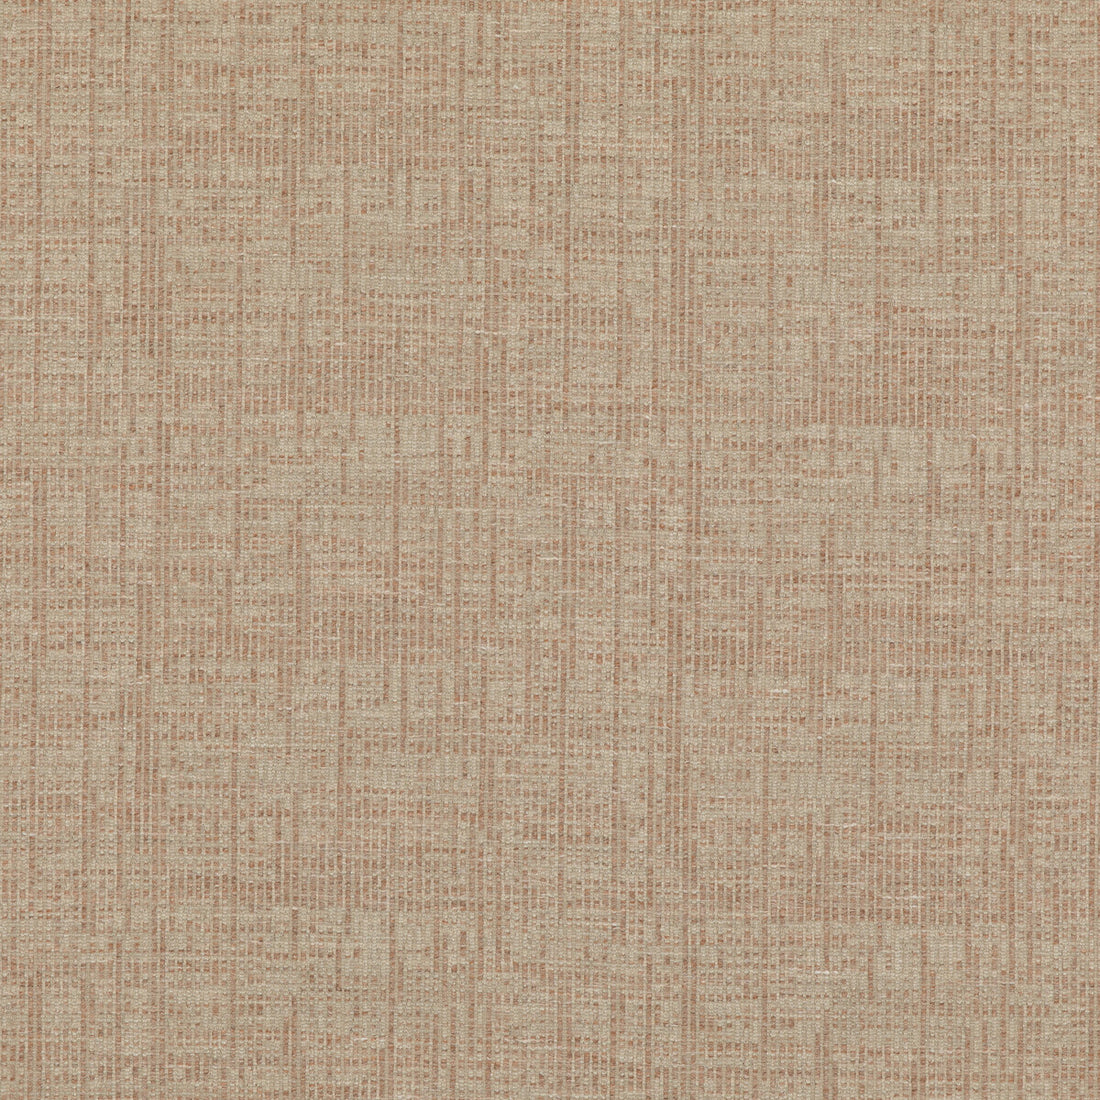 Umbra fabric in dusk color - pattern ED85327.425.0 - by Threads in the Luxury Weaves II collection